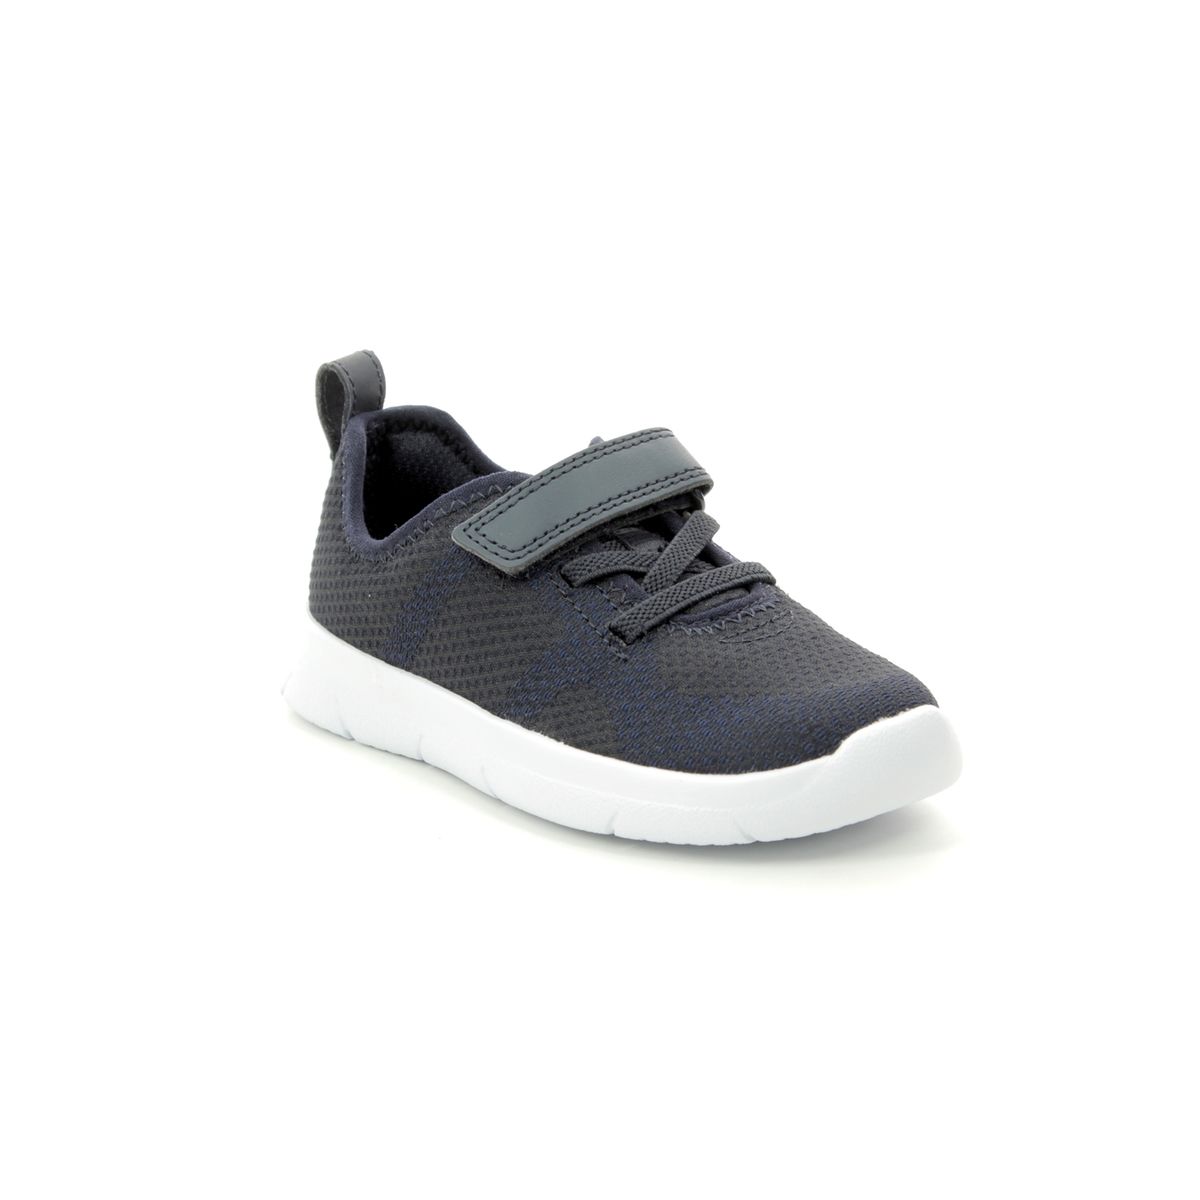 Clarks Ath Flux T Navy Kids Toddler Boys Trainers 412697G In Size 5 In Plain Navy G Width Fitting For kids